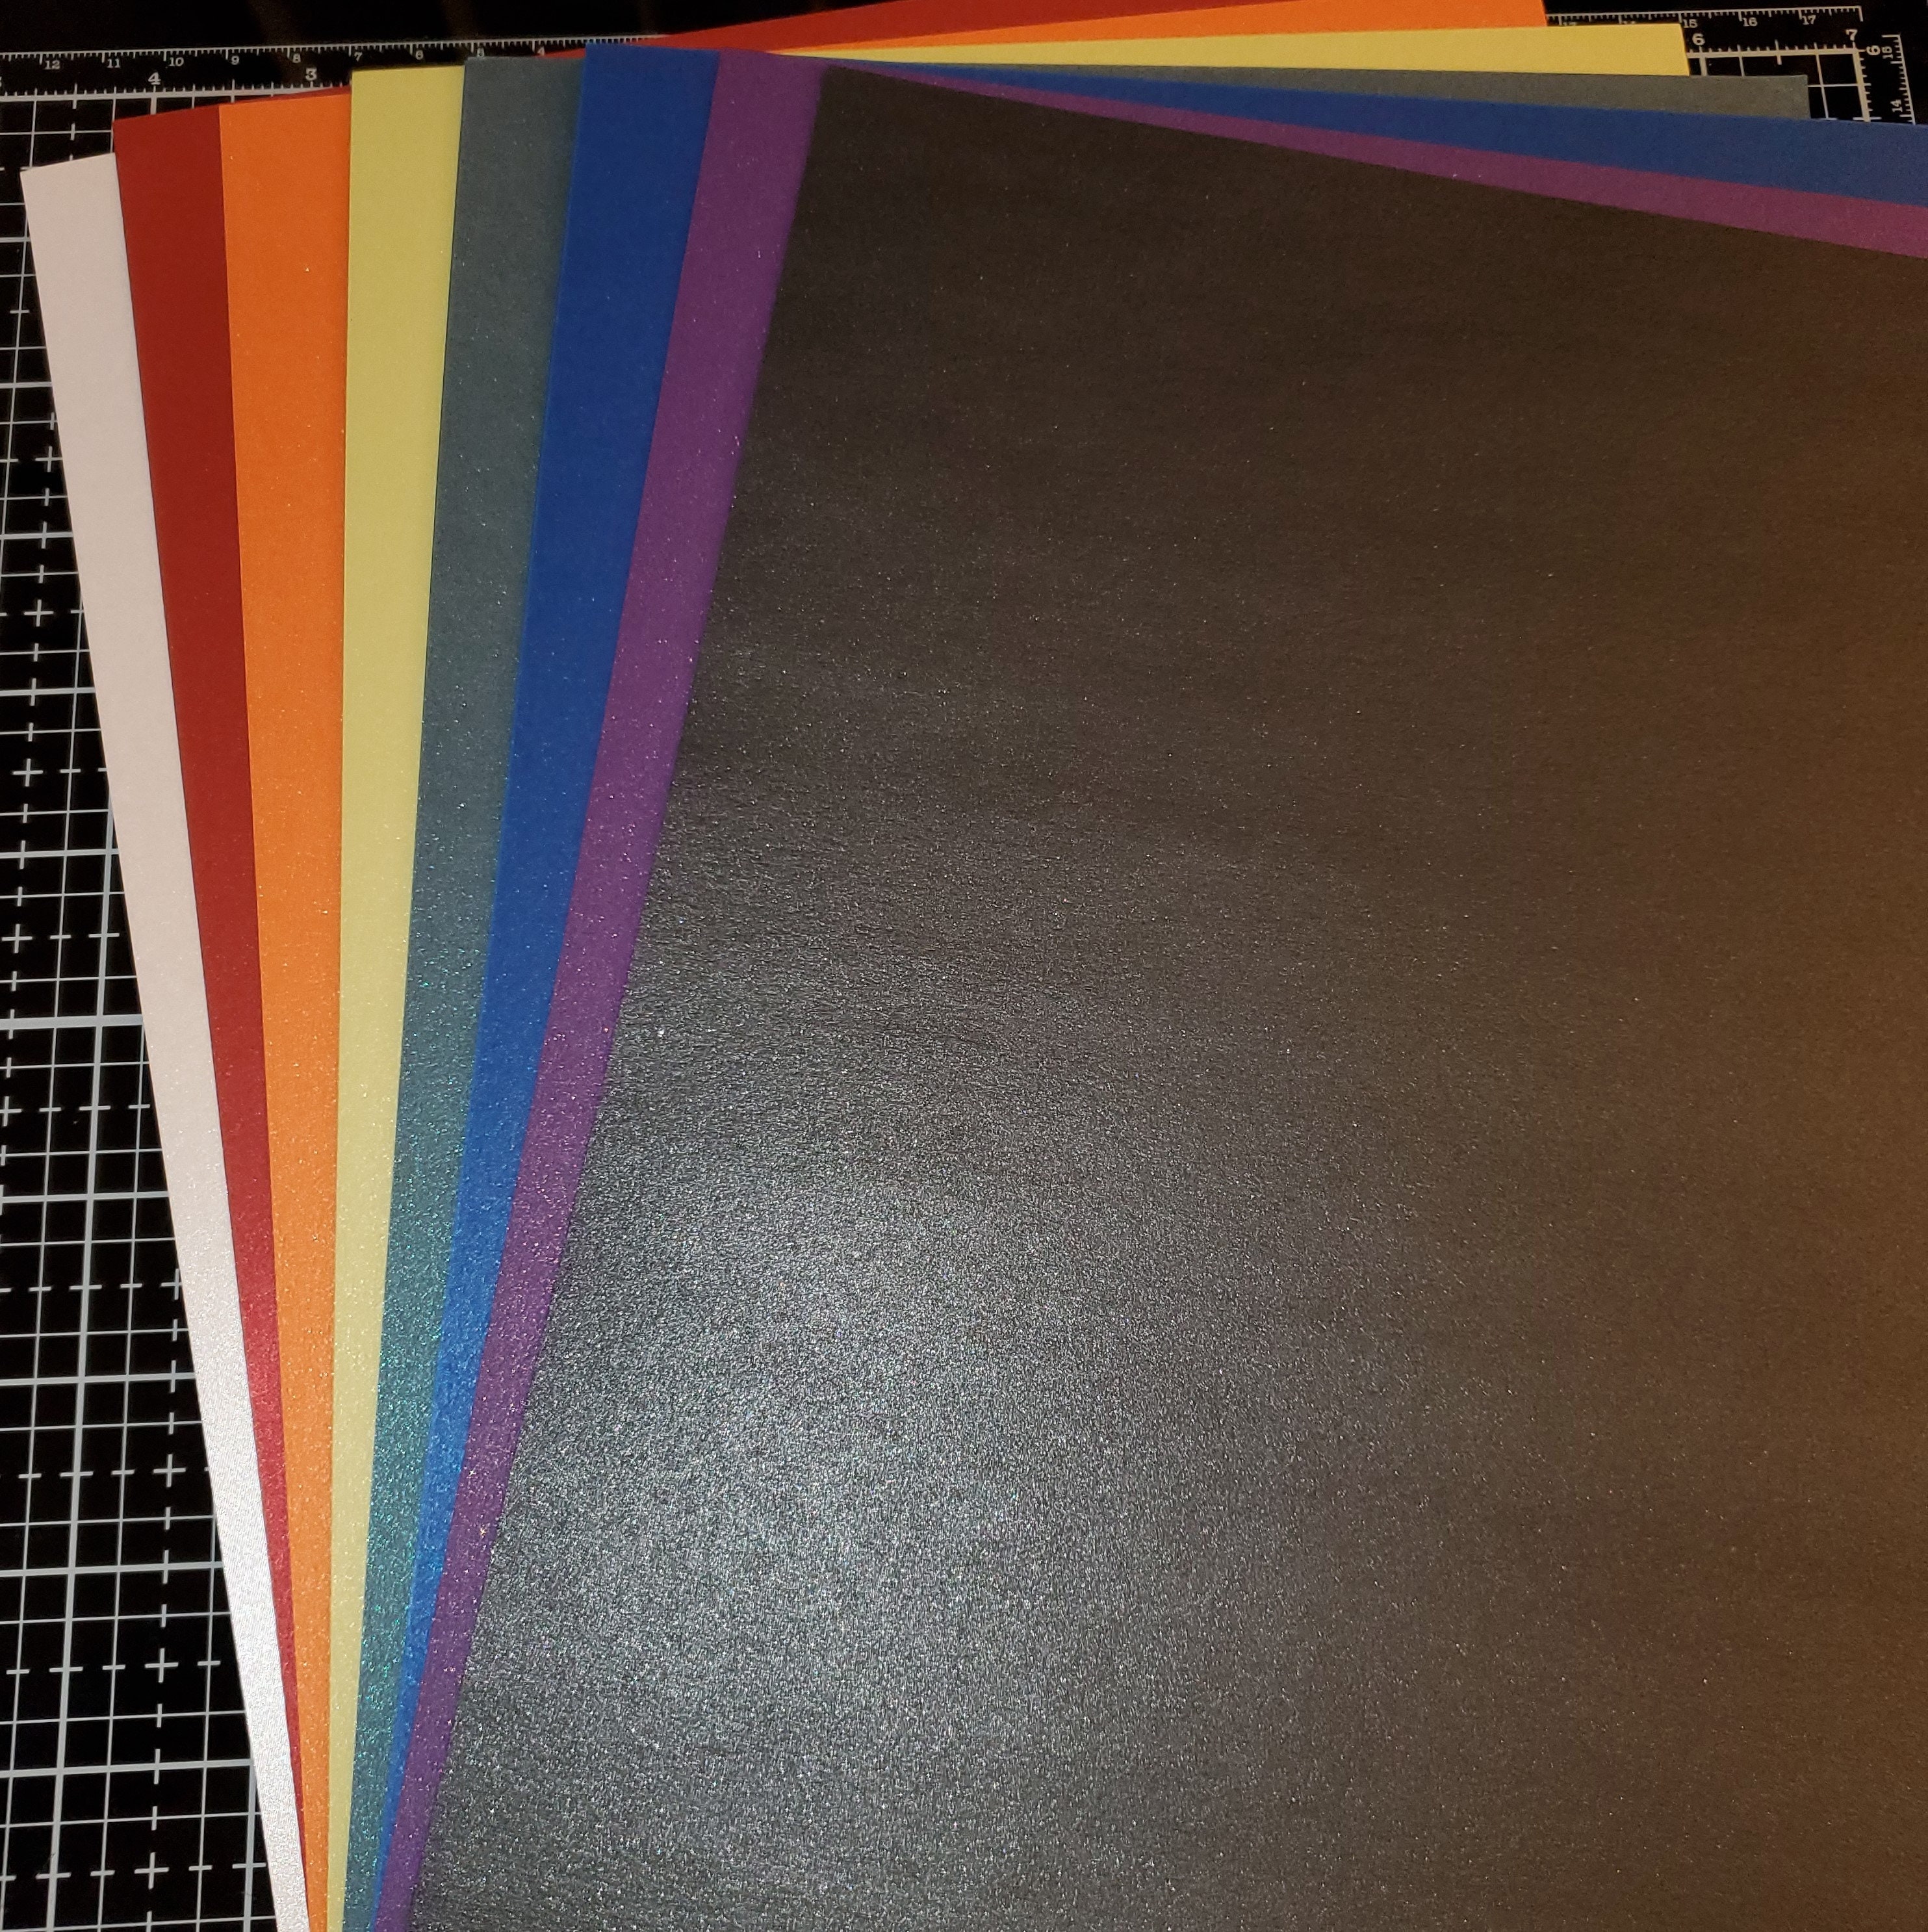 Pearl Shimmer Metallic Black Cardstock - 8.5x11 inch - 105lb Cover - 10 Sheets